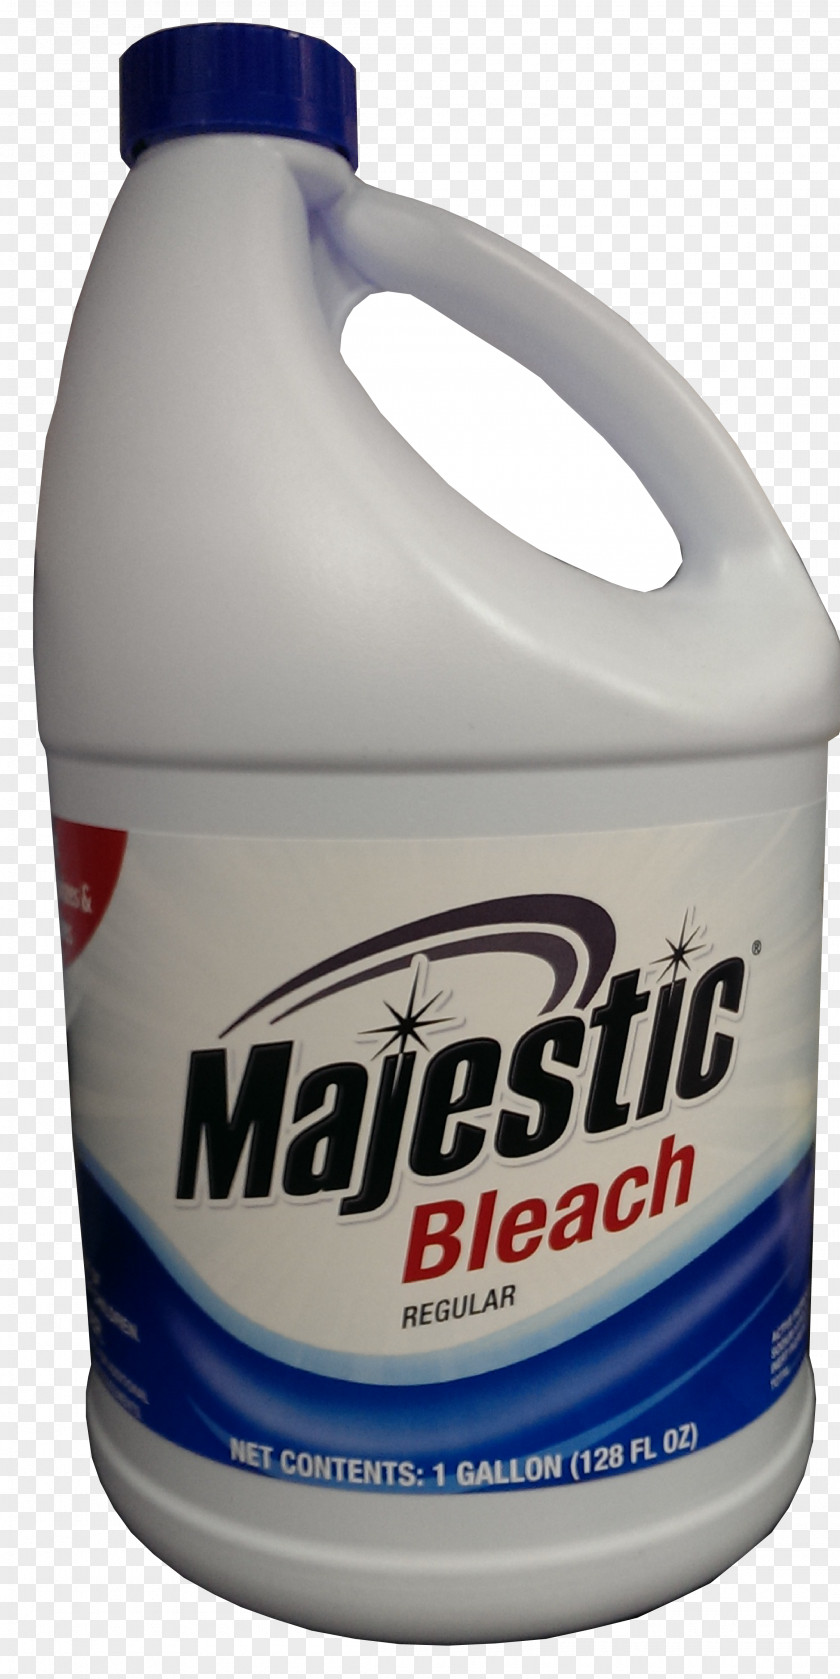 Bleach Bottle Stain The Clorox Company Gallon PNG